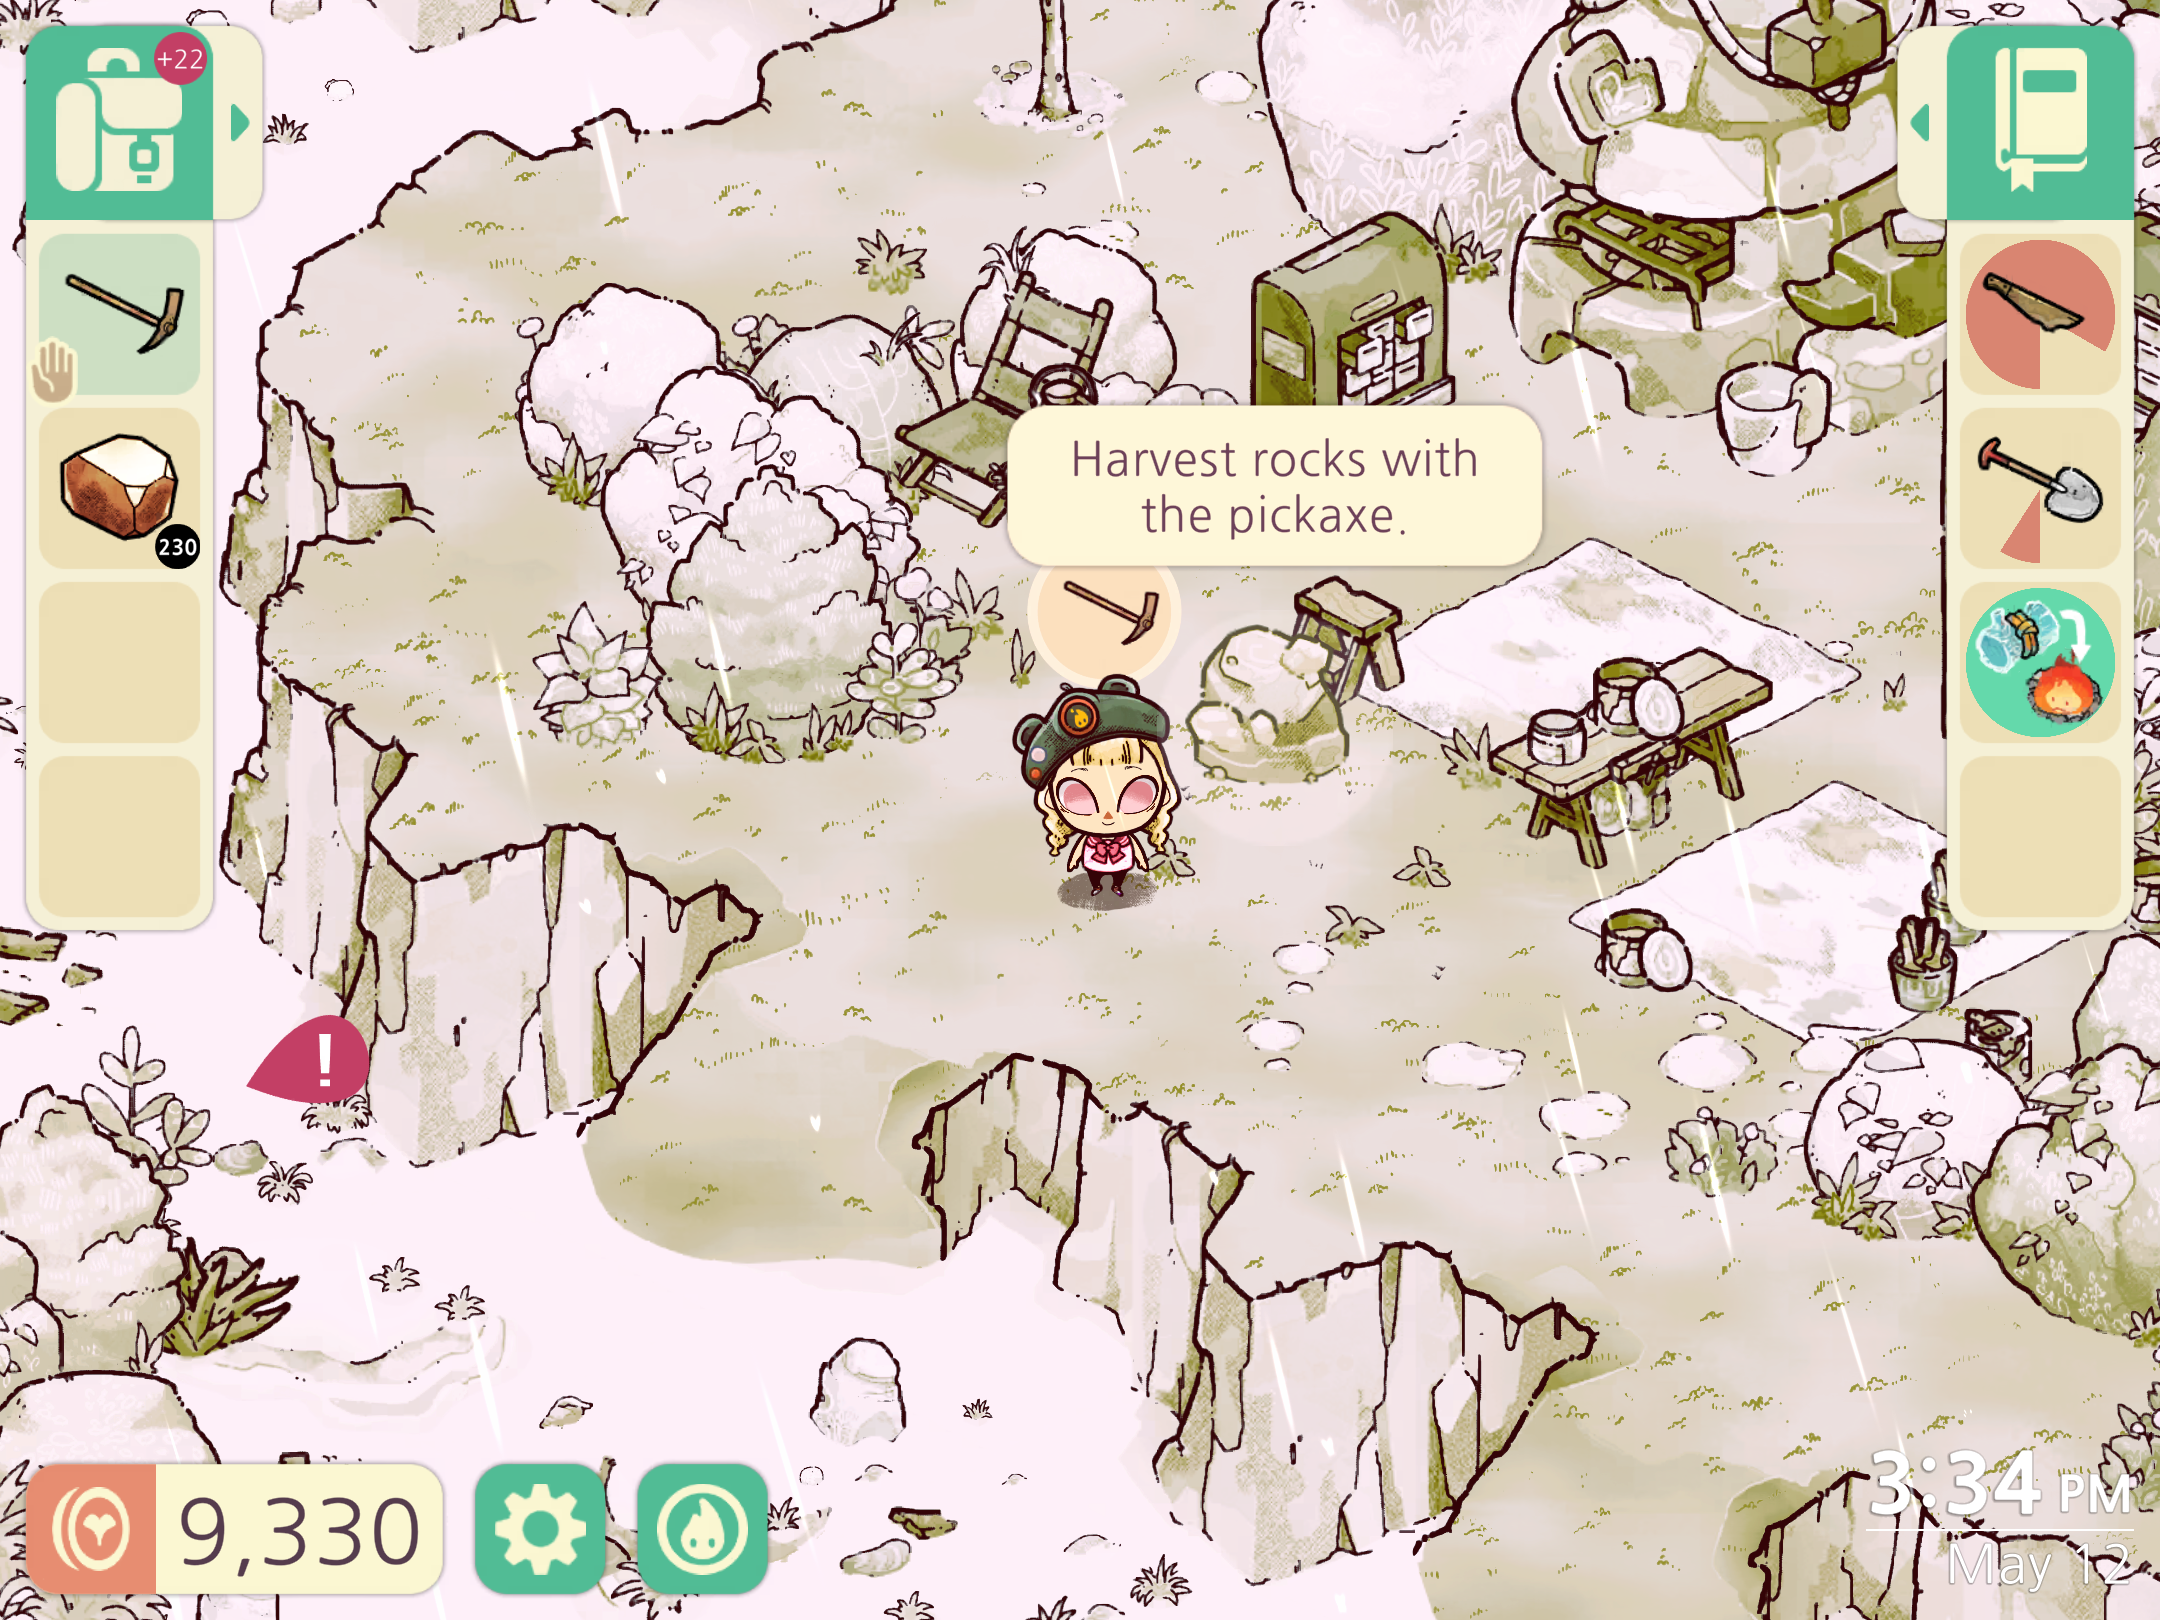 The rocks you mine for ore in 'Cozy Grove'